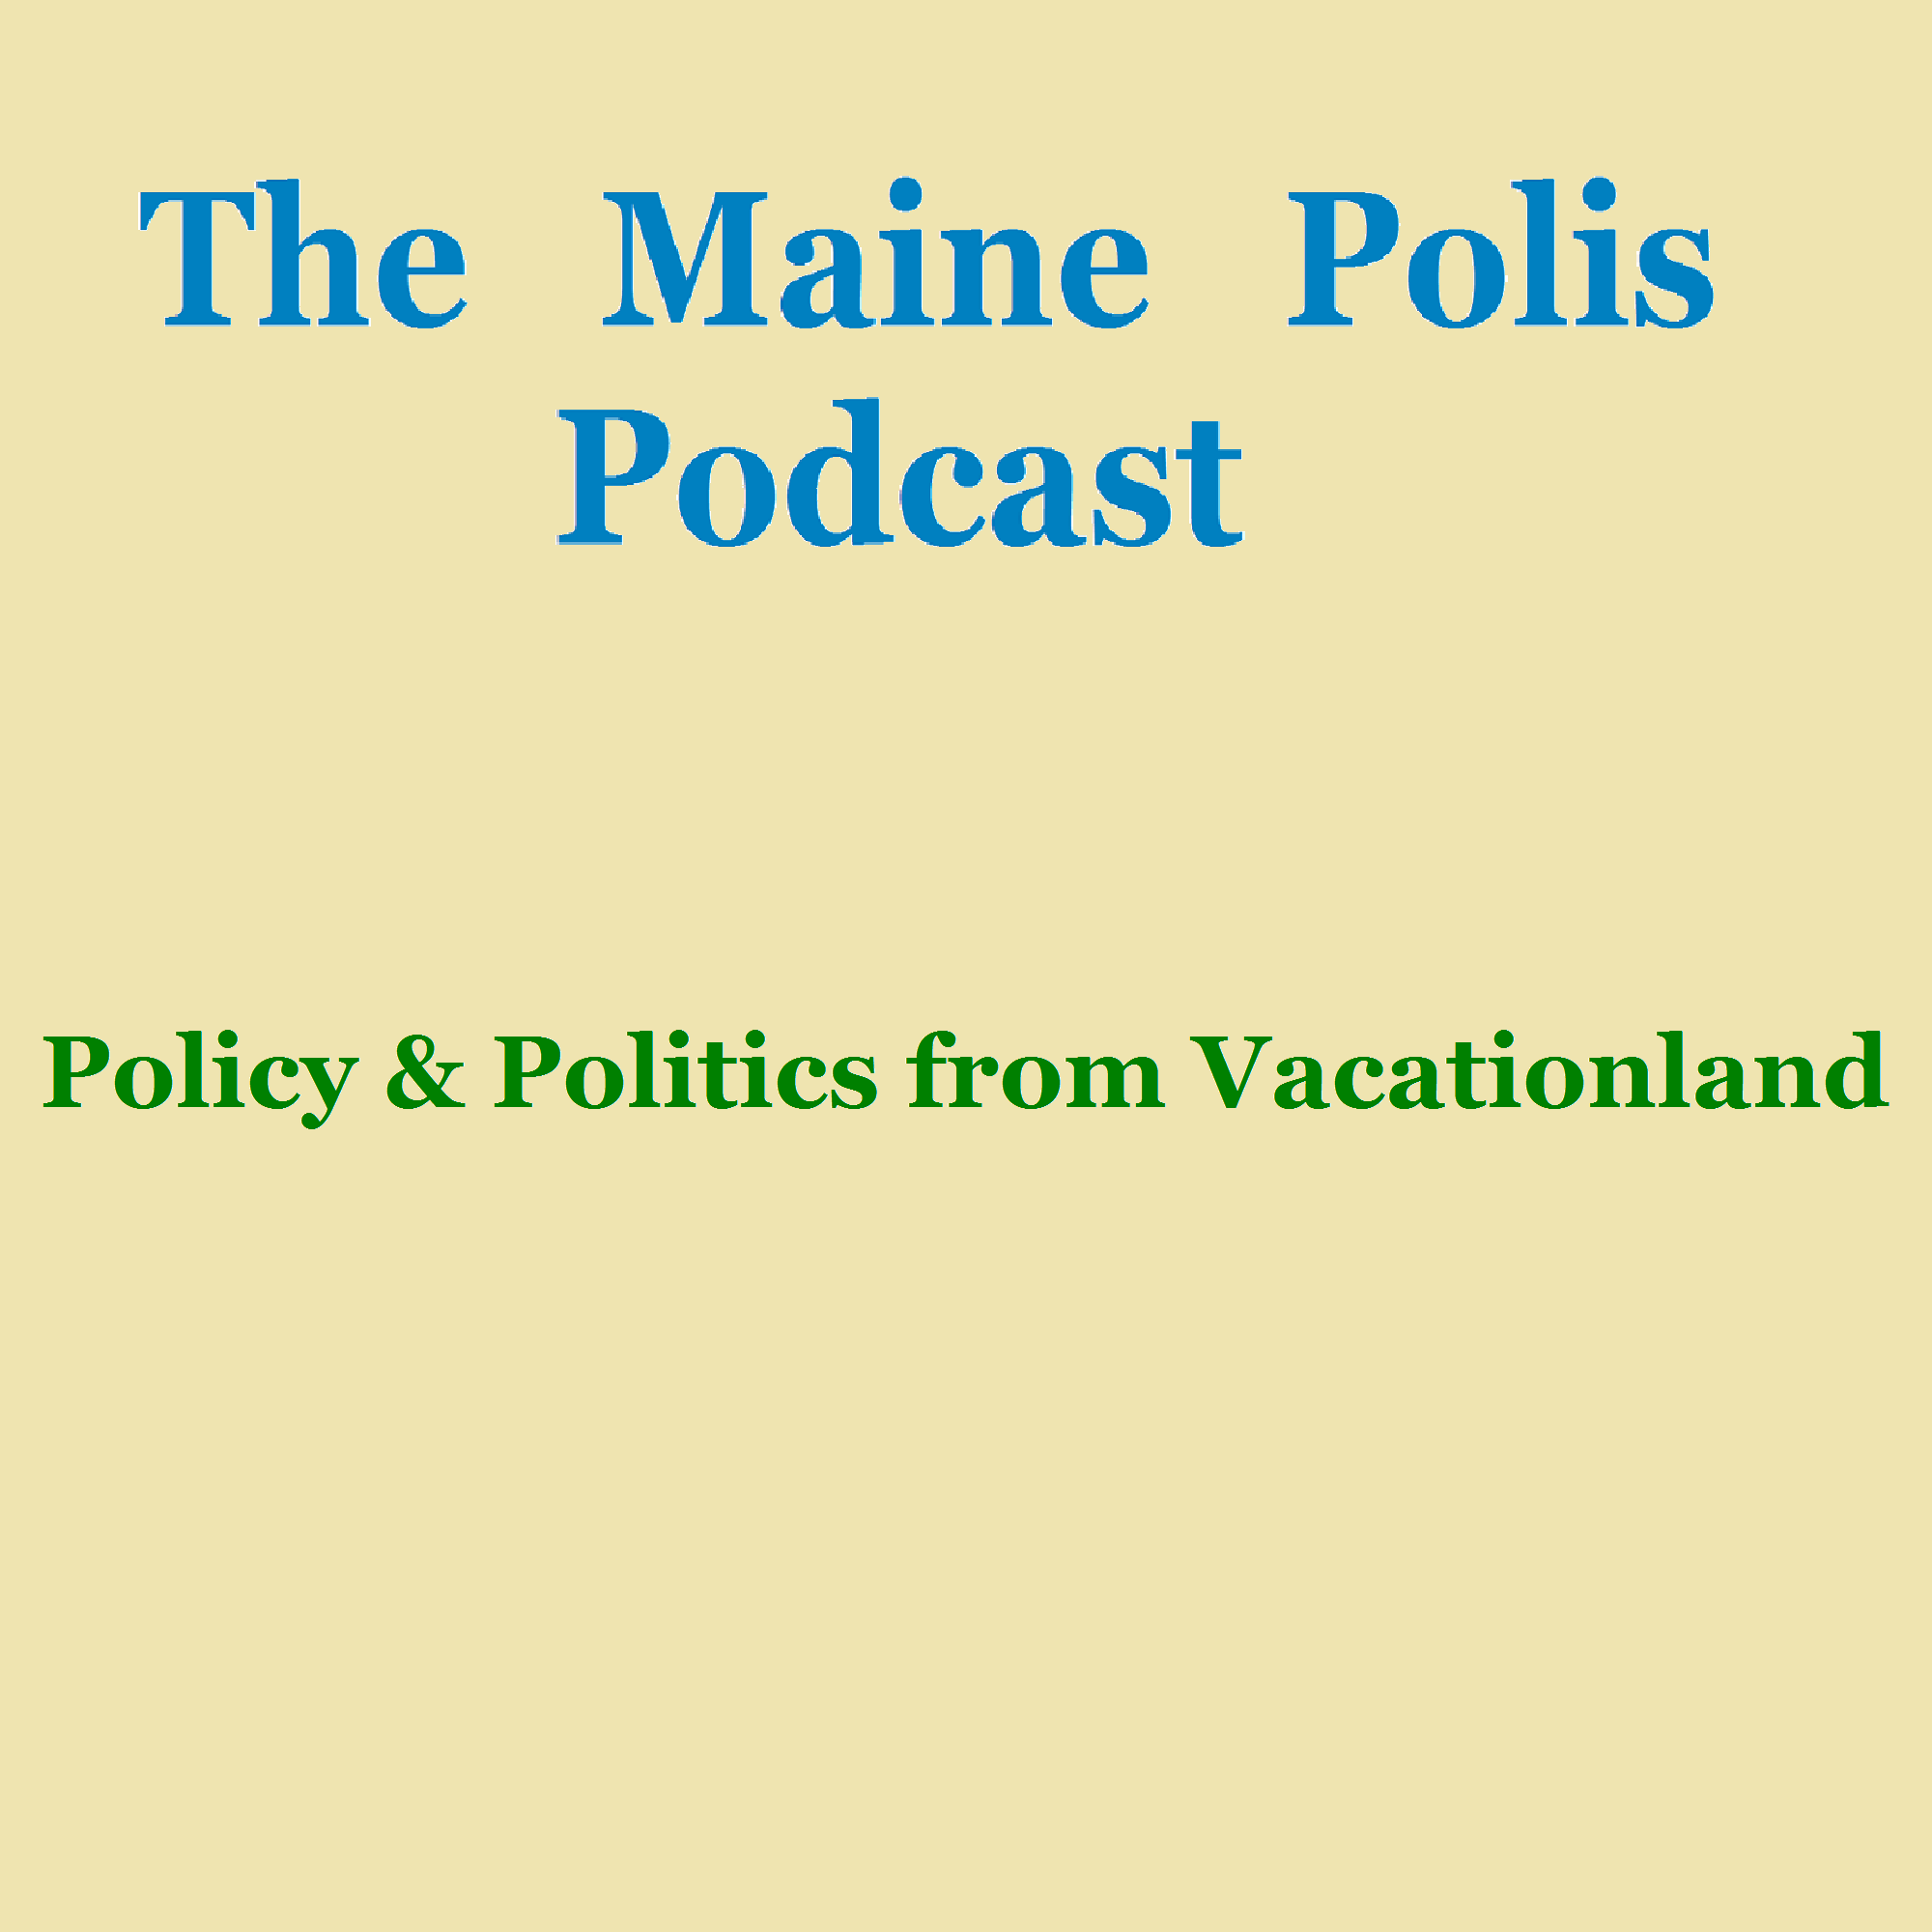 TMP Podcast #5 - New England Clean Energy Connect Analysis Part I:  How the NECEC Got Legs